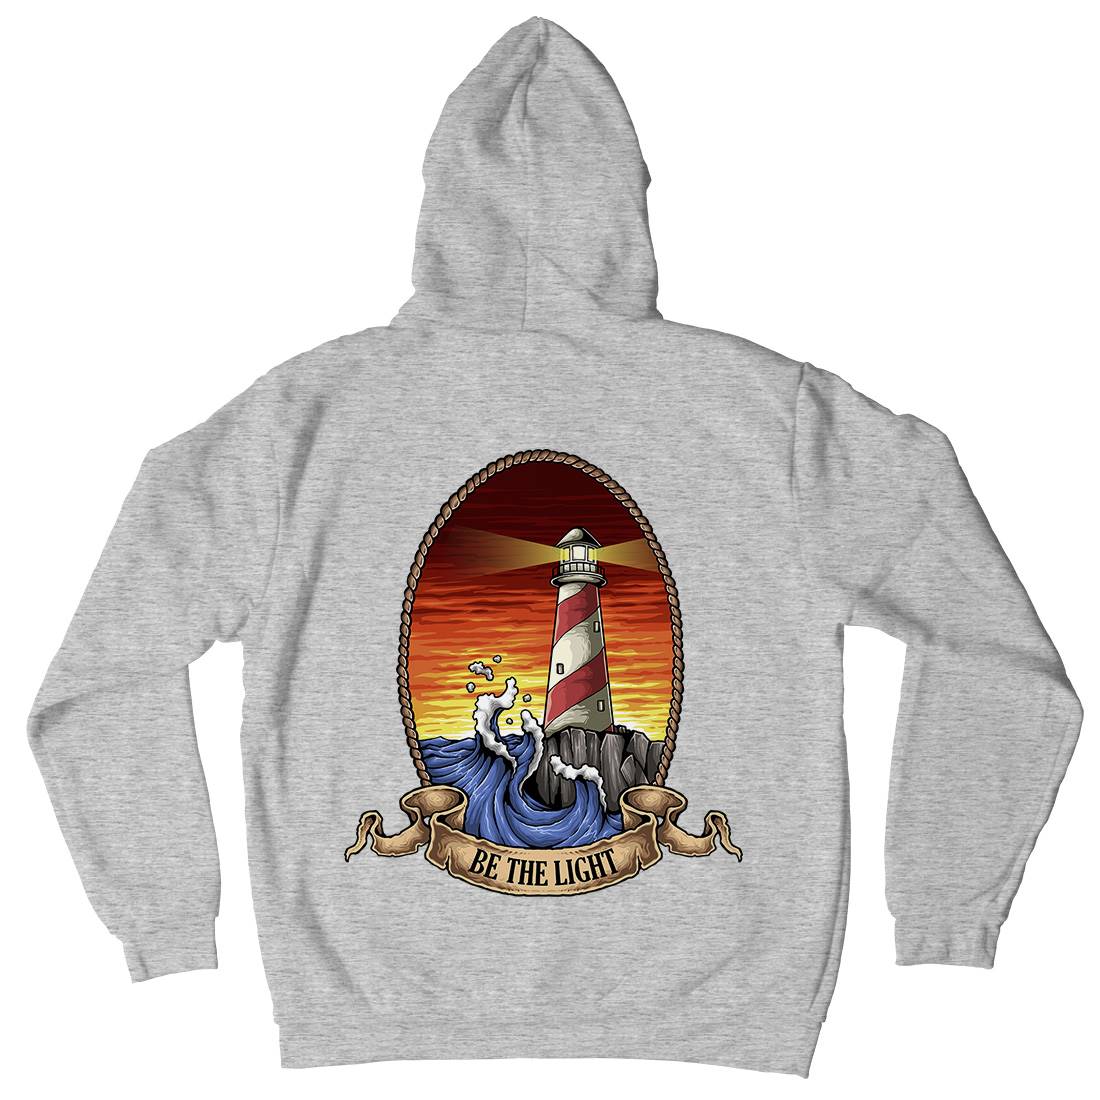 Lighthouse Mens Hoodie With Pocket Navy A433